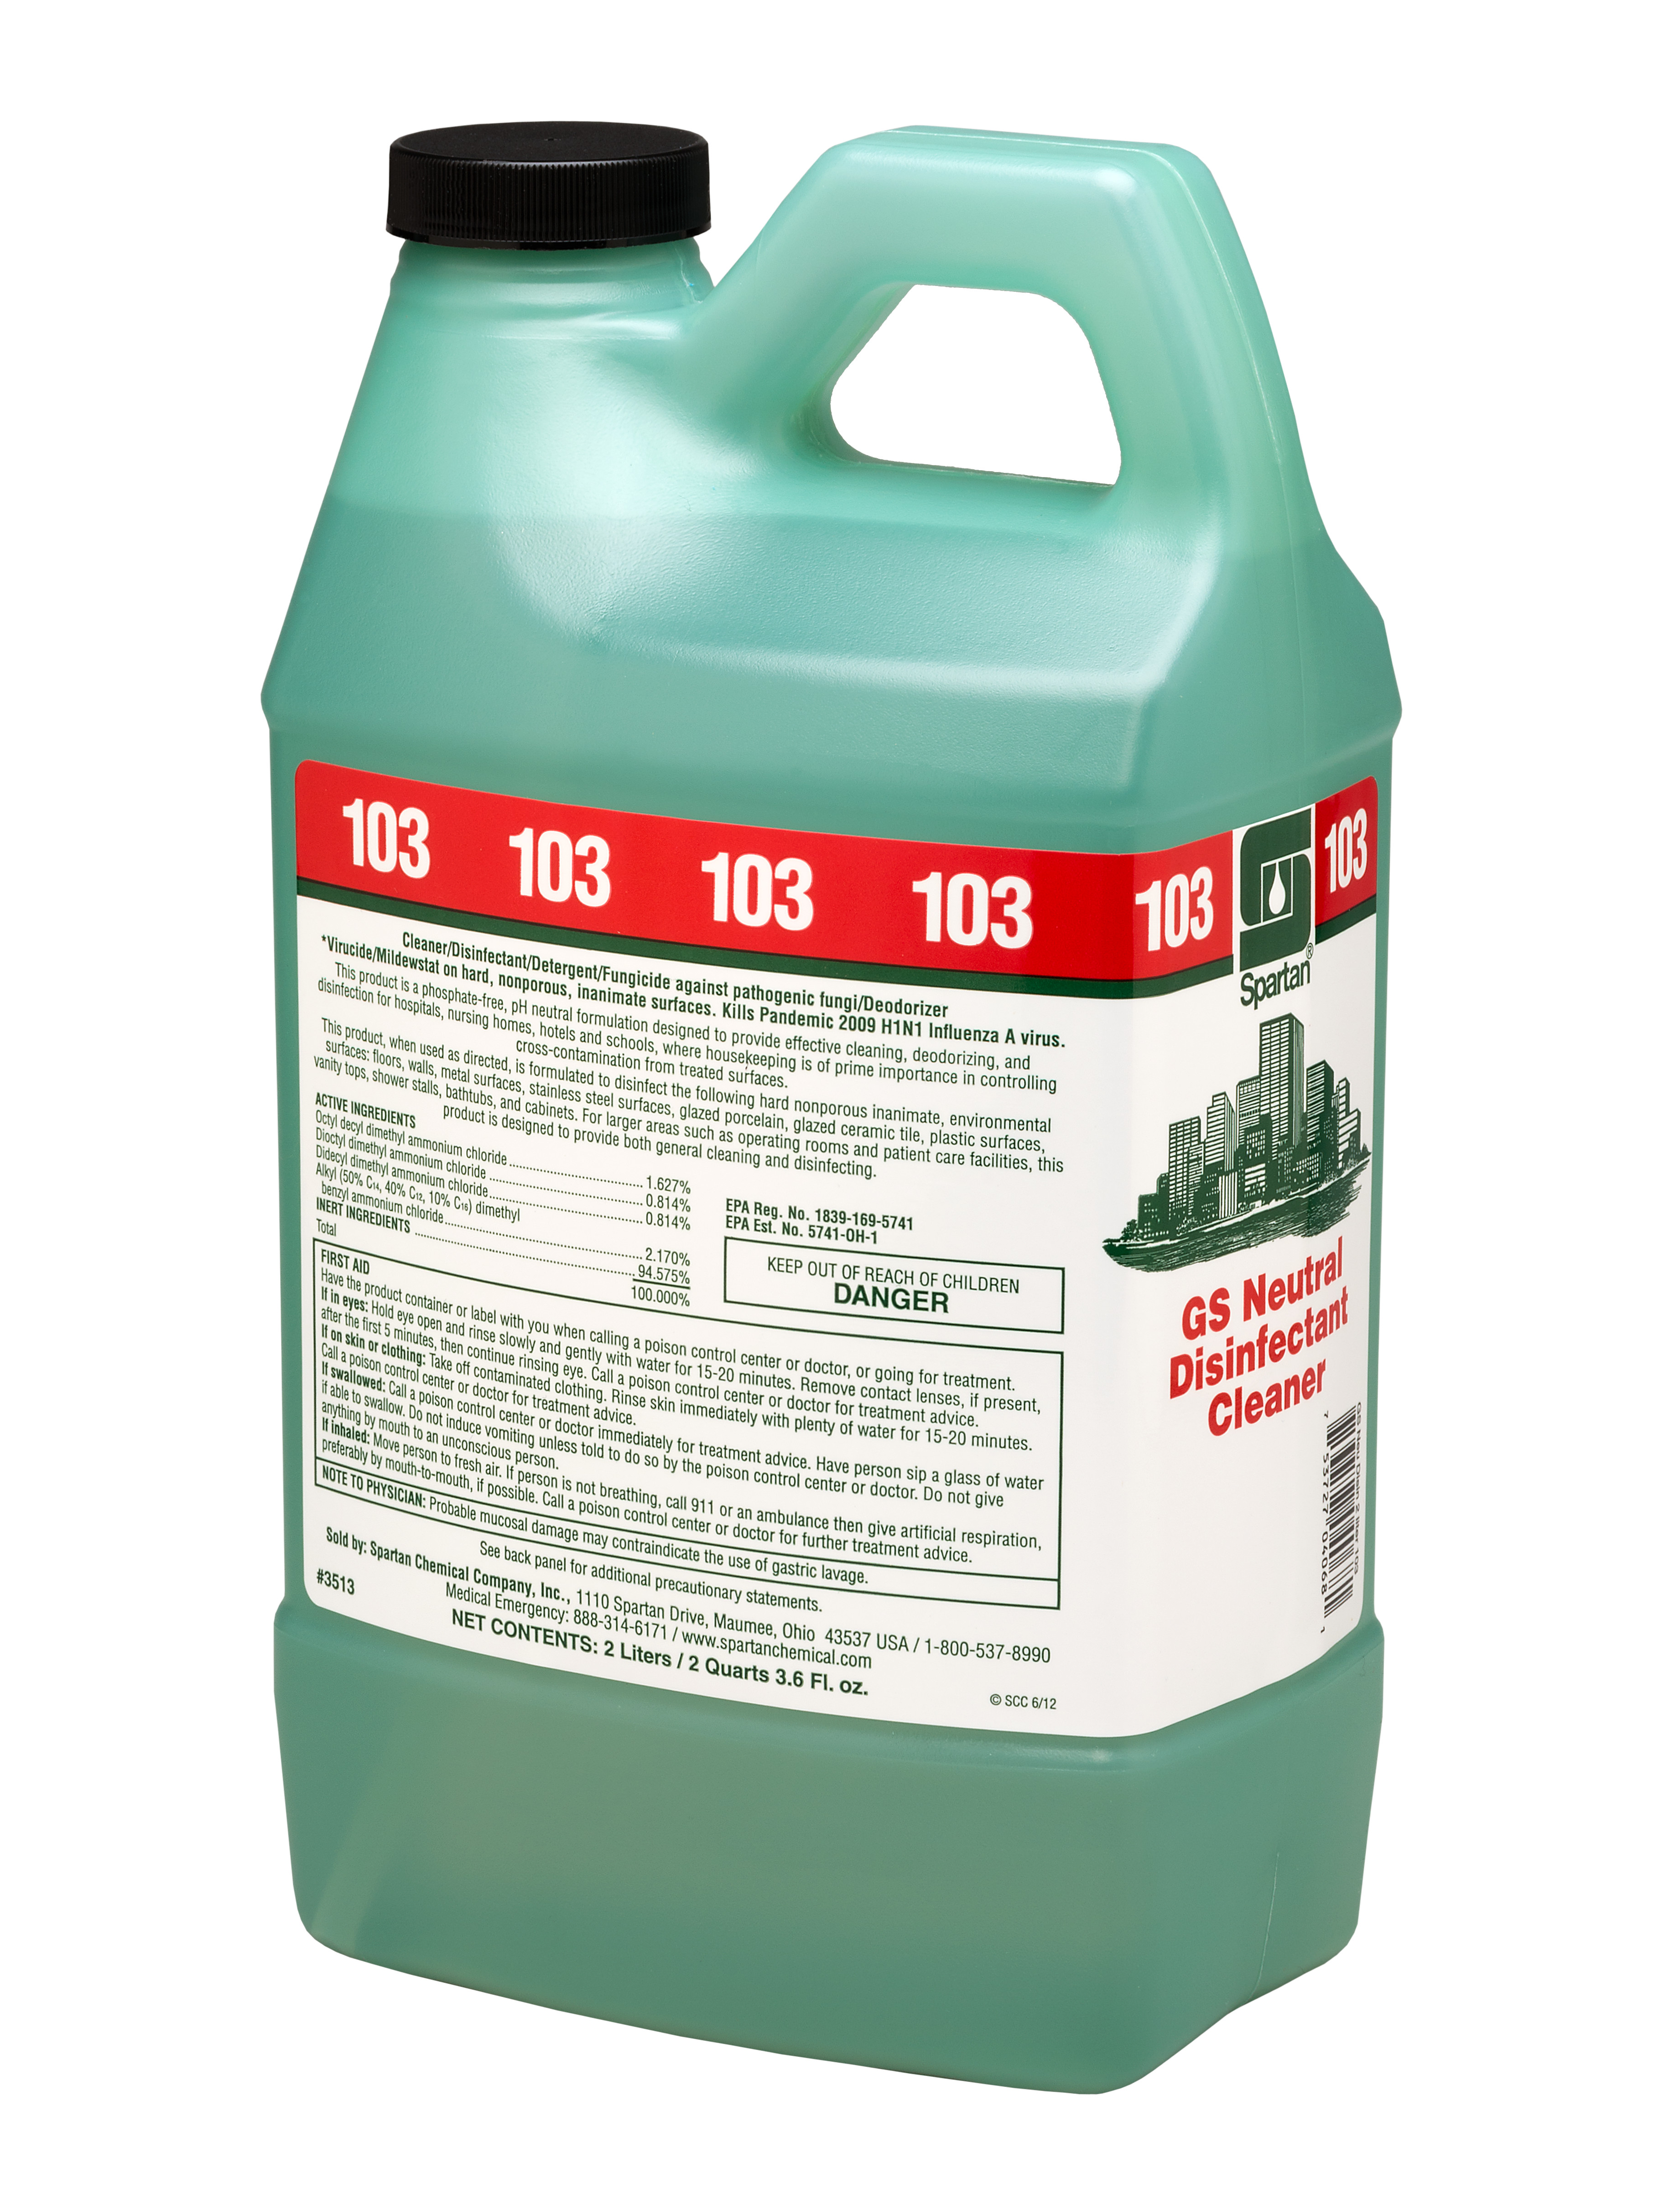 Spartan Chemical Company GS Neutral Disinfectant Cleaner 103, 2 LITER 4/CS